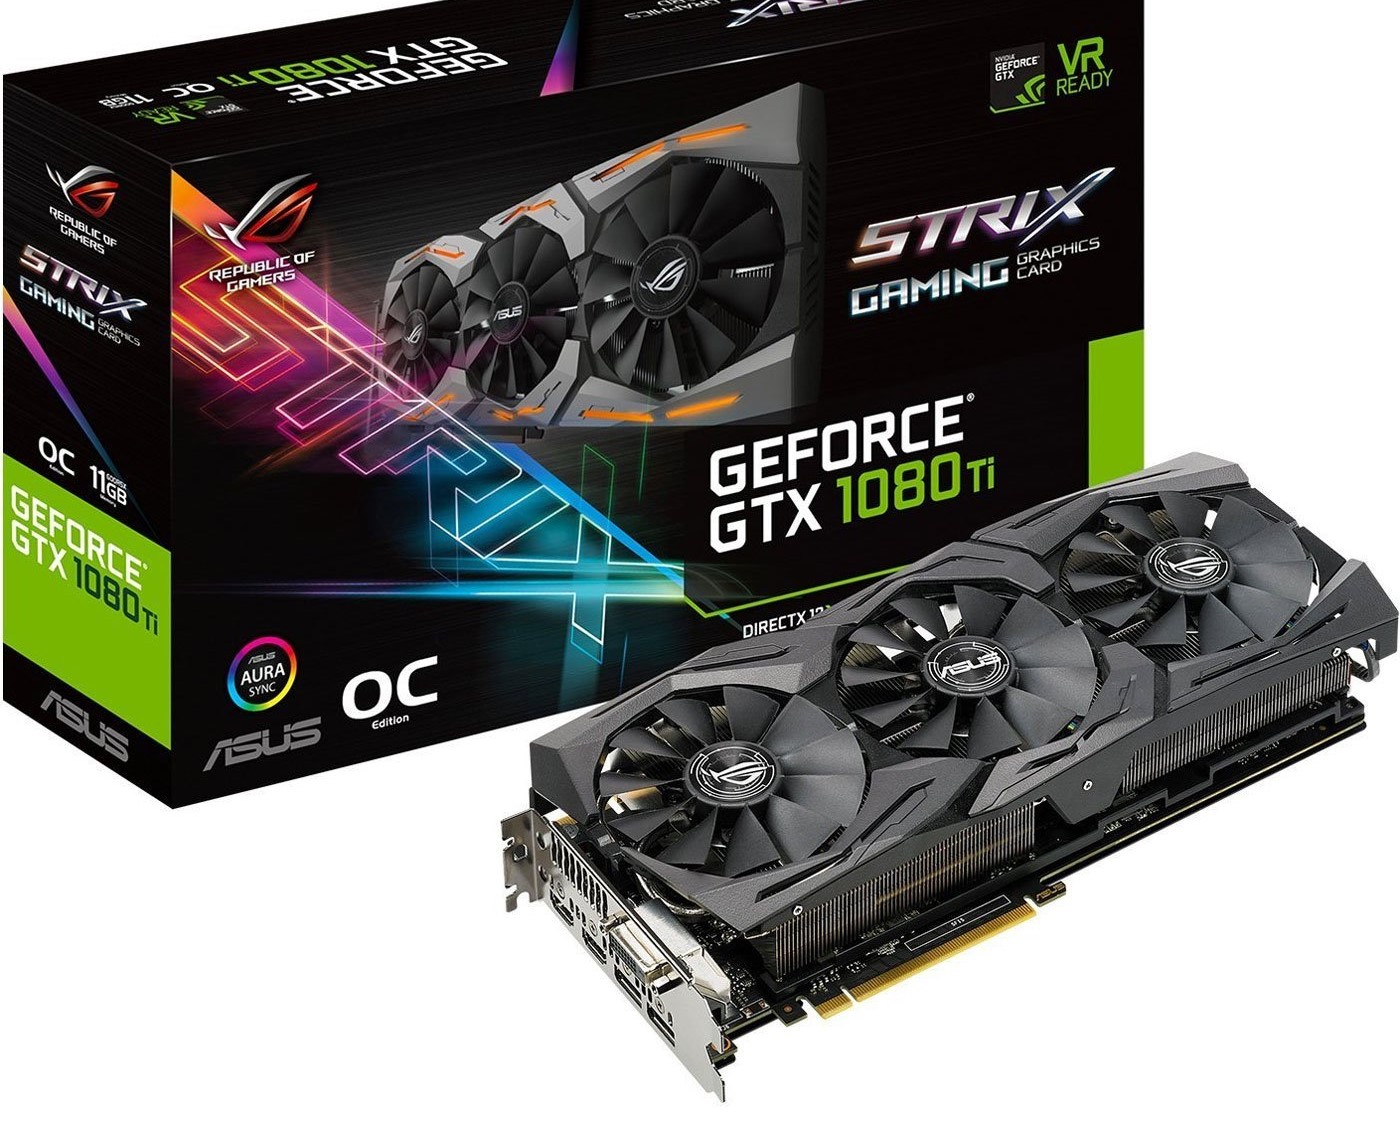 Which Nvidia graphics card is best for gaming?